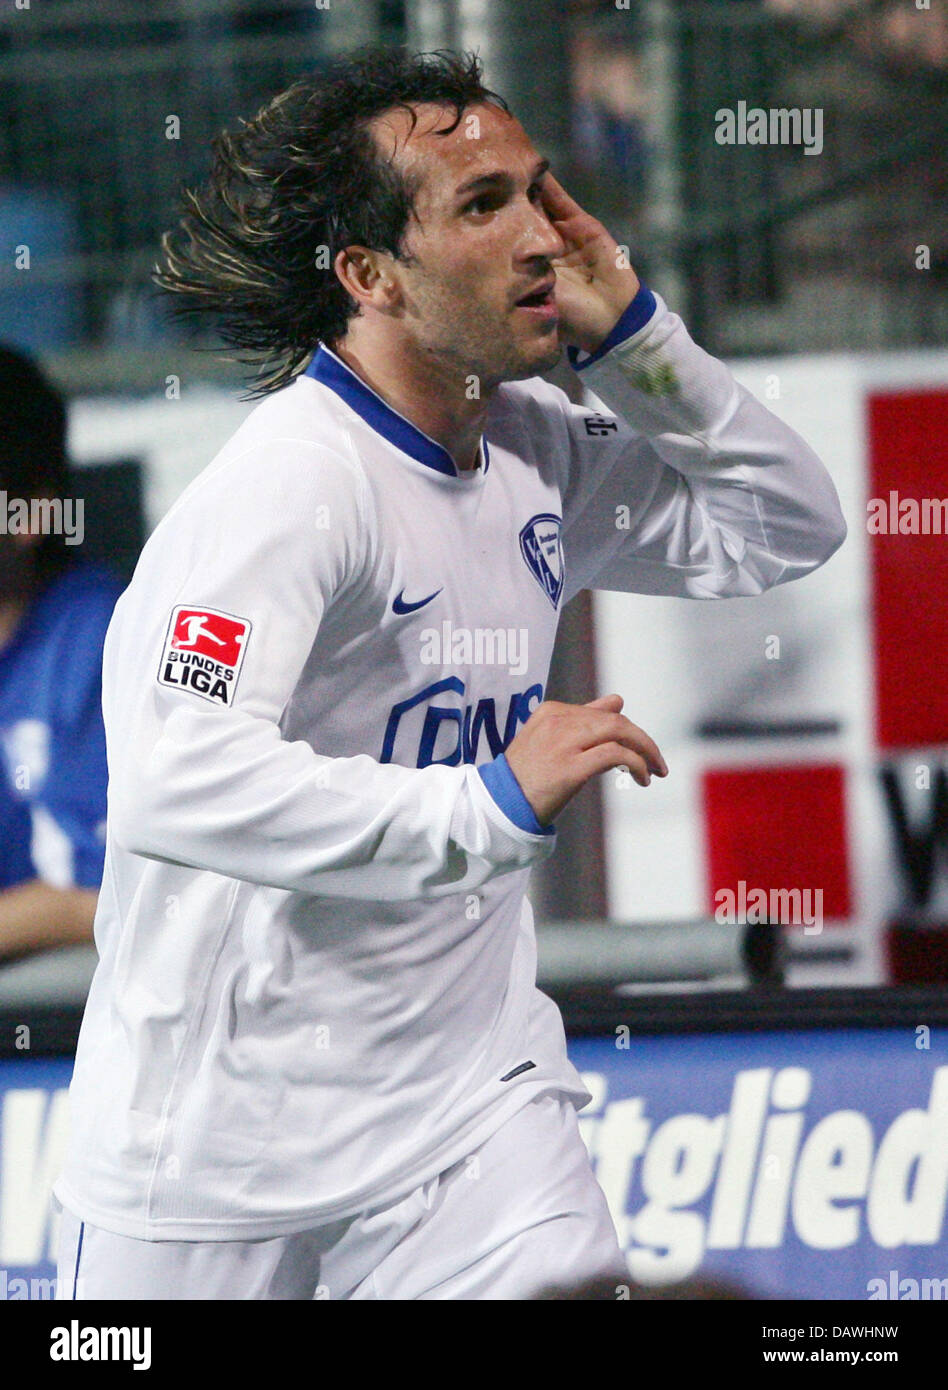 Bochum's player Theofanis Gekas holds his hand to his ear after shooting the 2:1 lead goal during the Bundesliga match between VfL Bochum and FC Schalke 04 at the Ruhrstadium in Bochum, Germany, Friday, 27 April 2007. Schalke lost 1:2. Photo: Achim Scheidemann Stock Photo